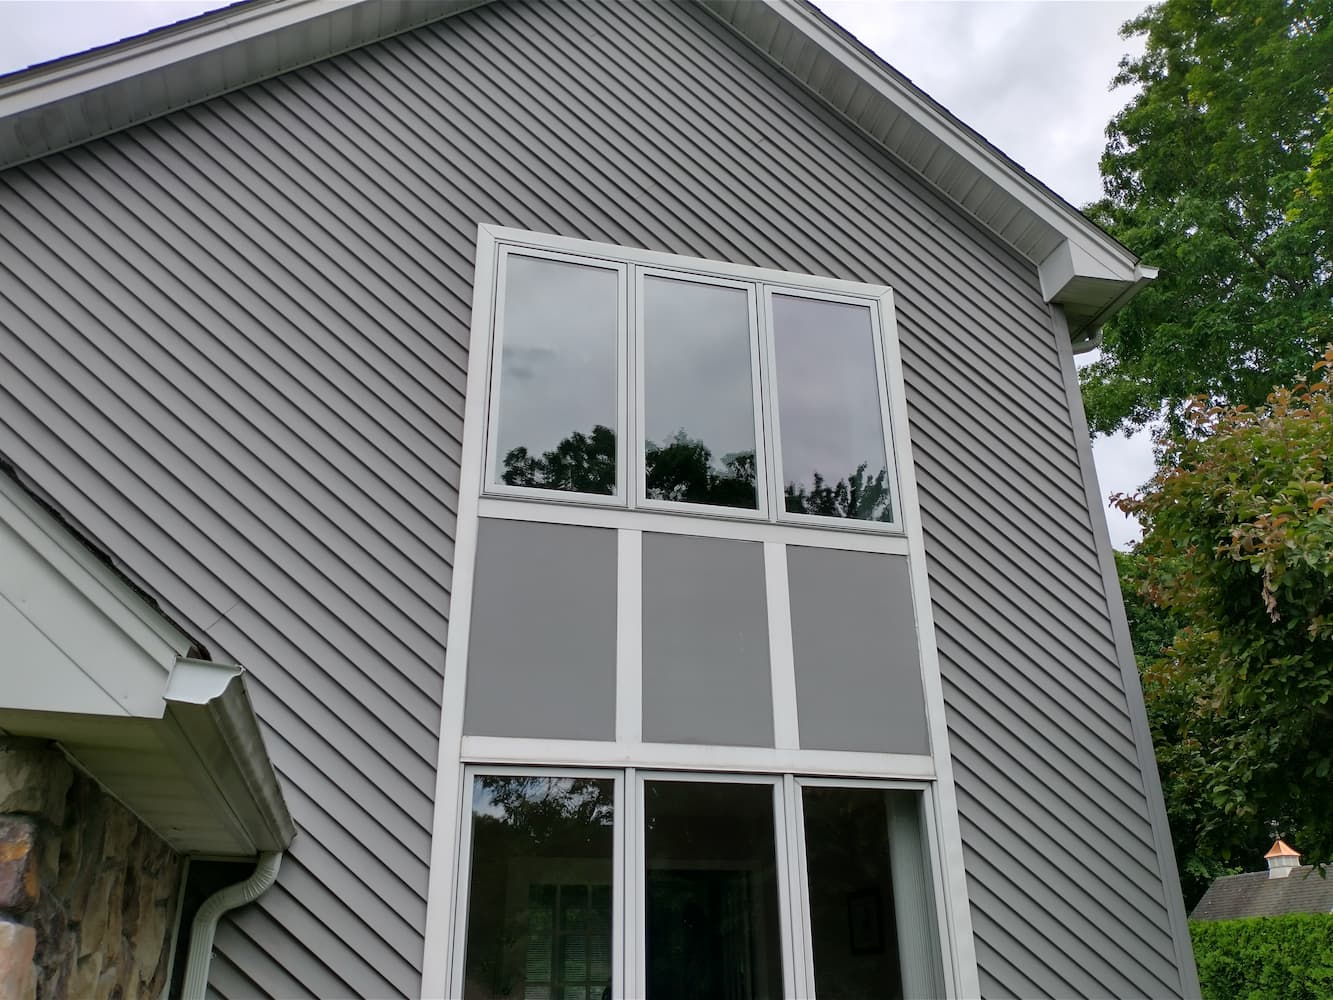 After exterior view of Ludlow home's existing windows